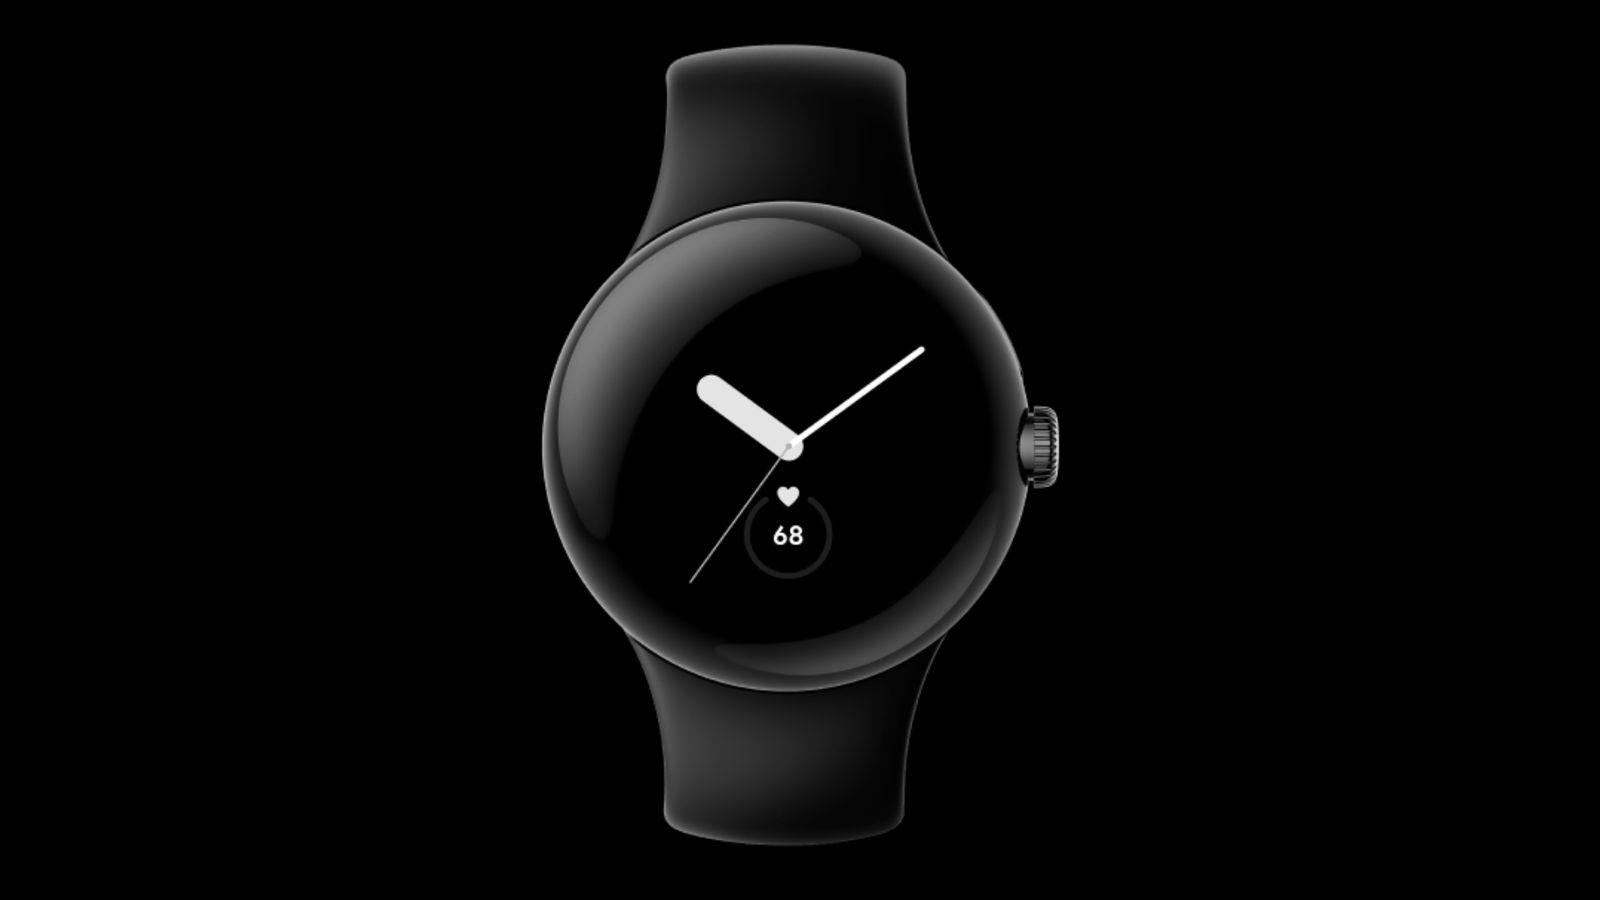 Google Pixel Watch product image of a black, circular smartwatch with analogue watch hands on the display in white along with heart rate.